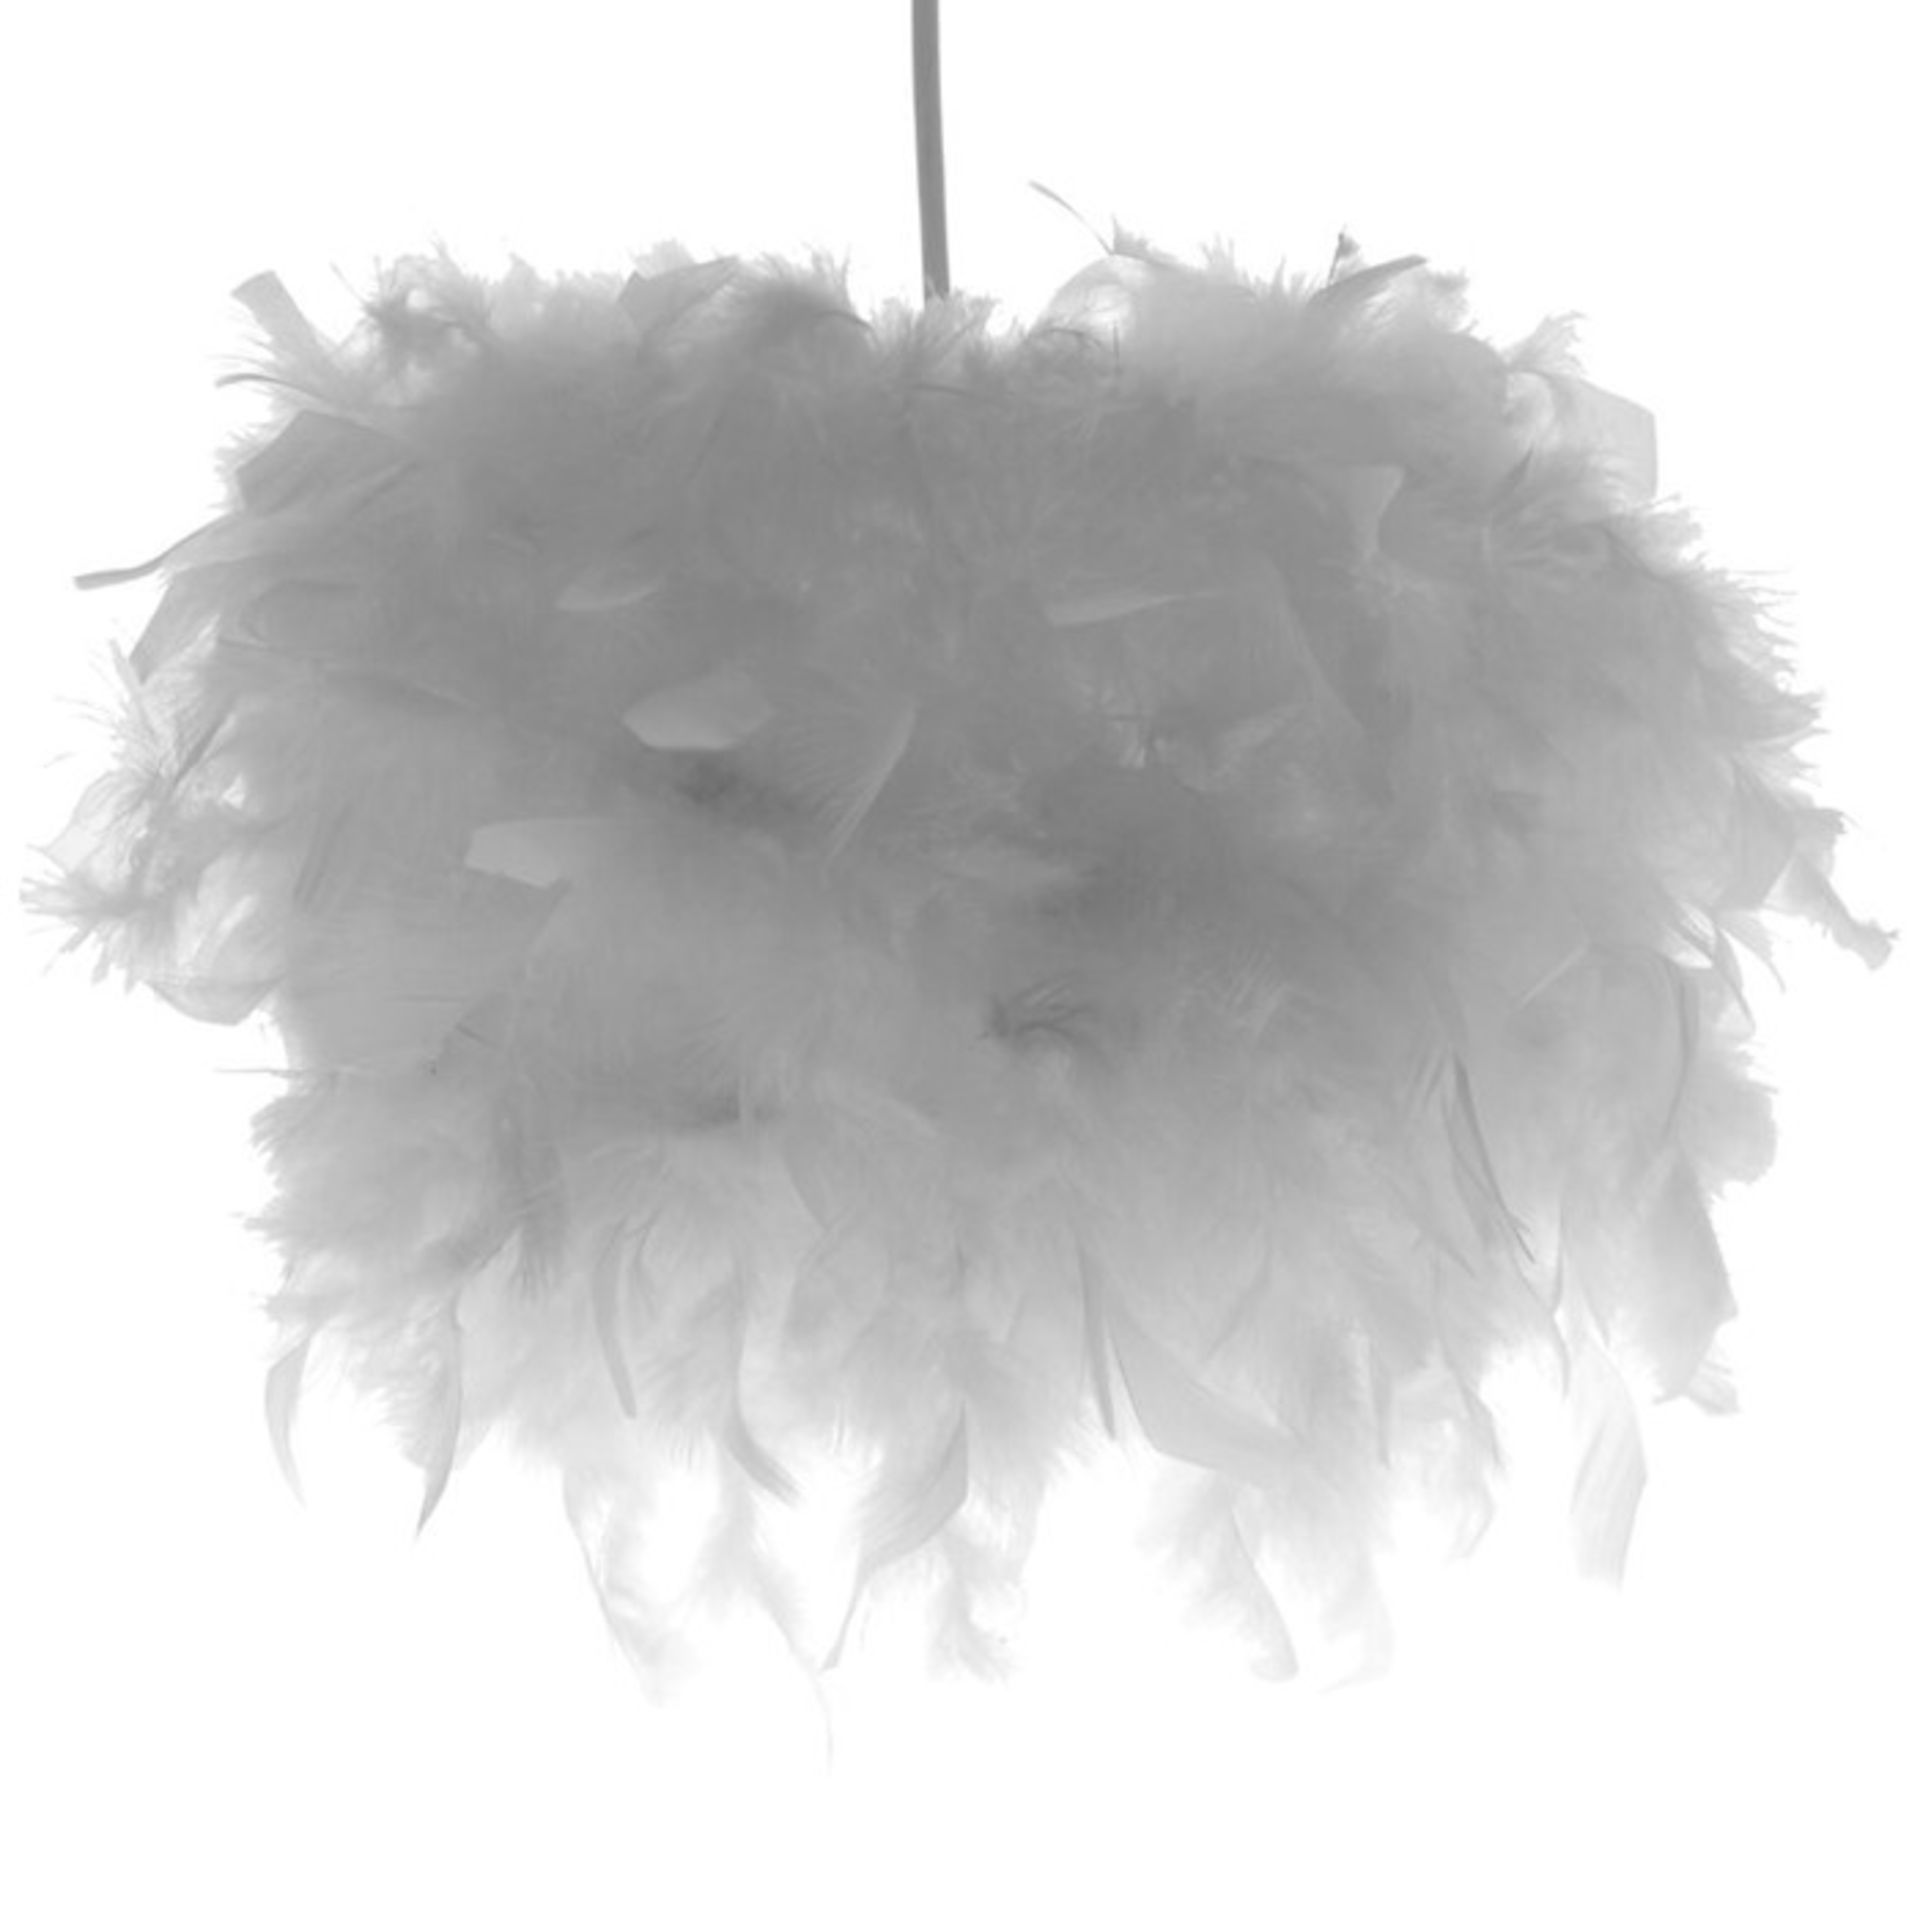 17 Stories, 25cm Feather Novelty Lamp Shade (WHITE) - RRP £23.99 (JQJJ1045.47387551 - HL9 - 15/36)